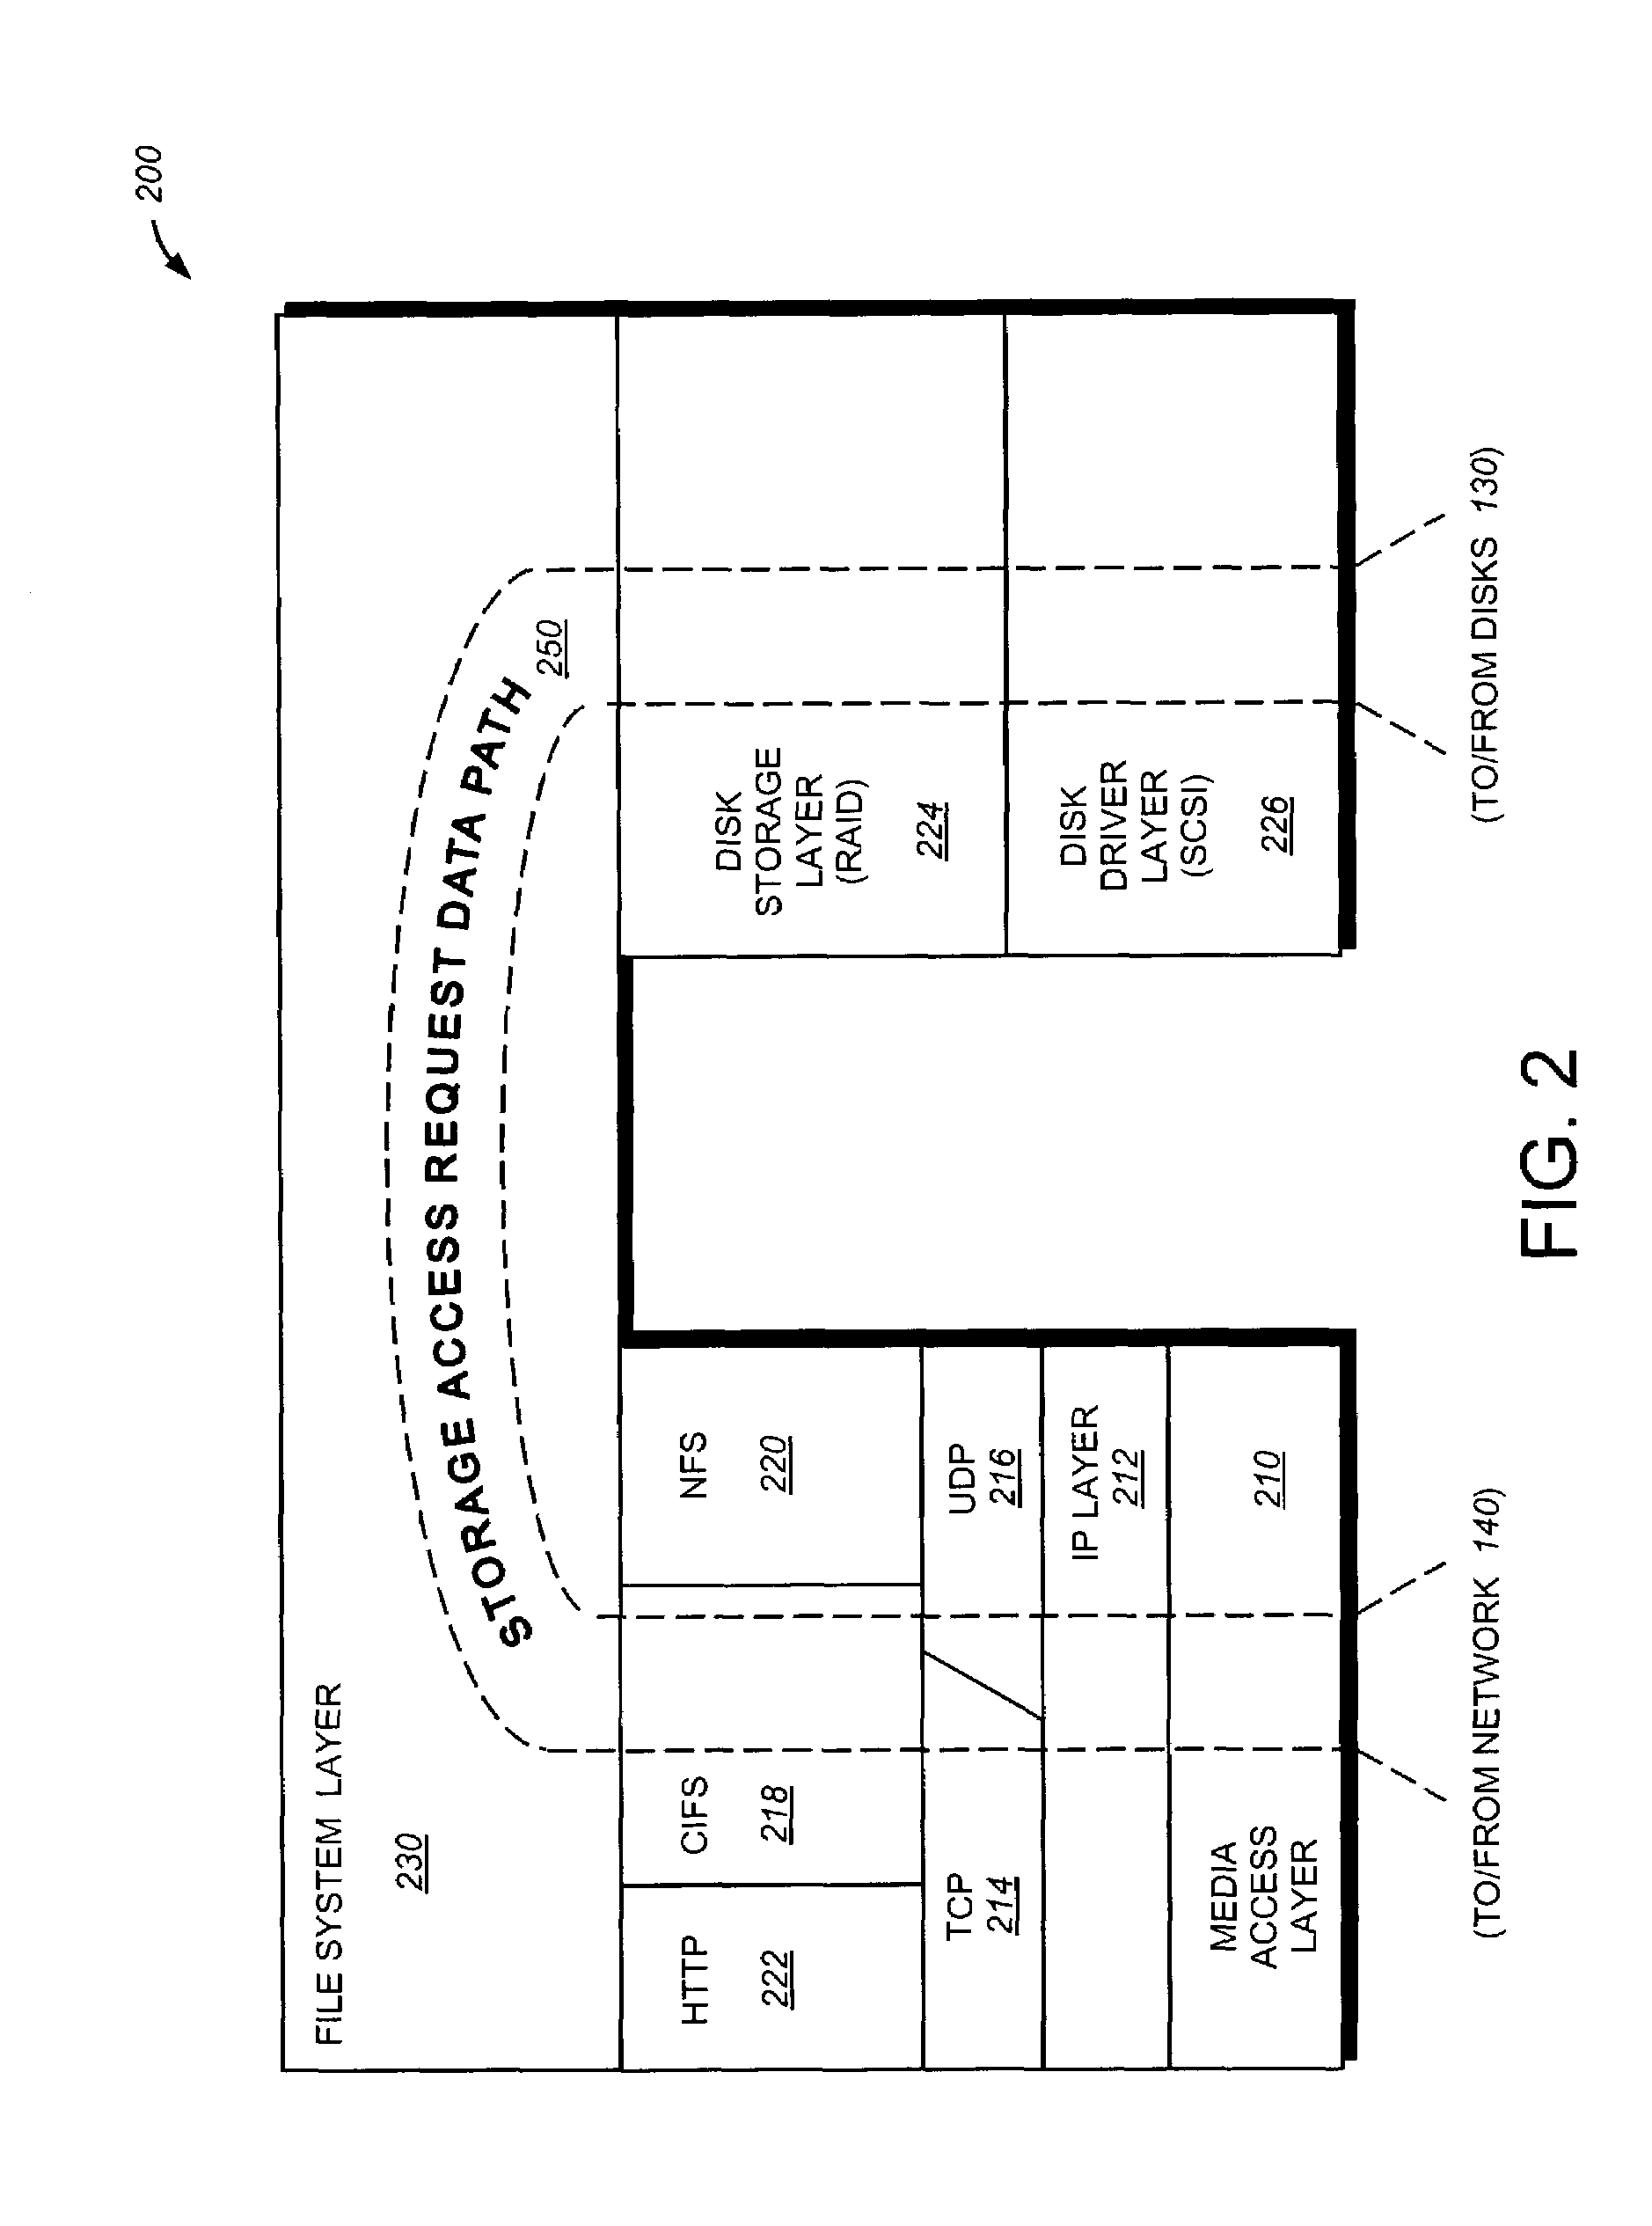 System and method for tracking modified files in a file system